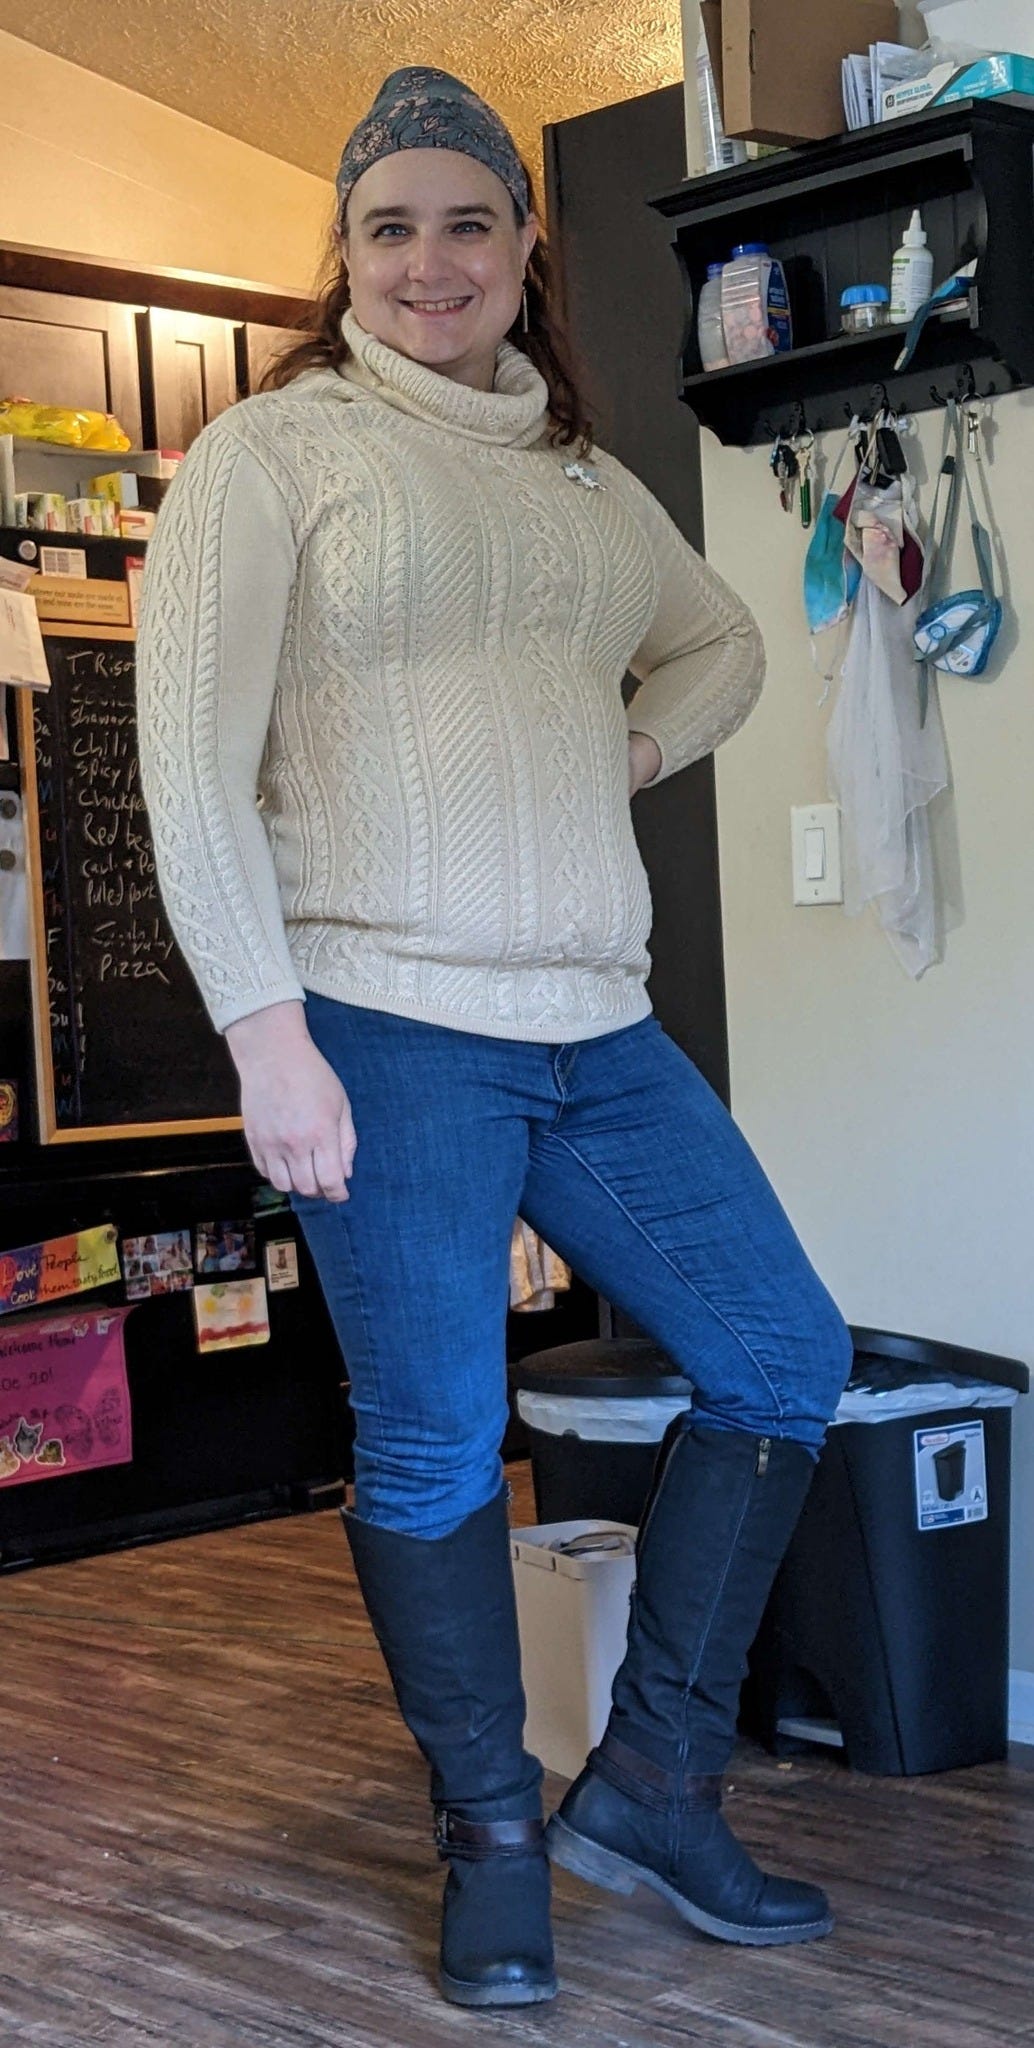 A picture of me, wearing a white sweater. My breasts do not look particularly large.